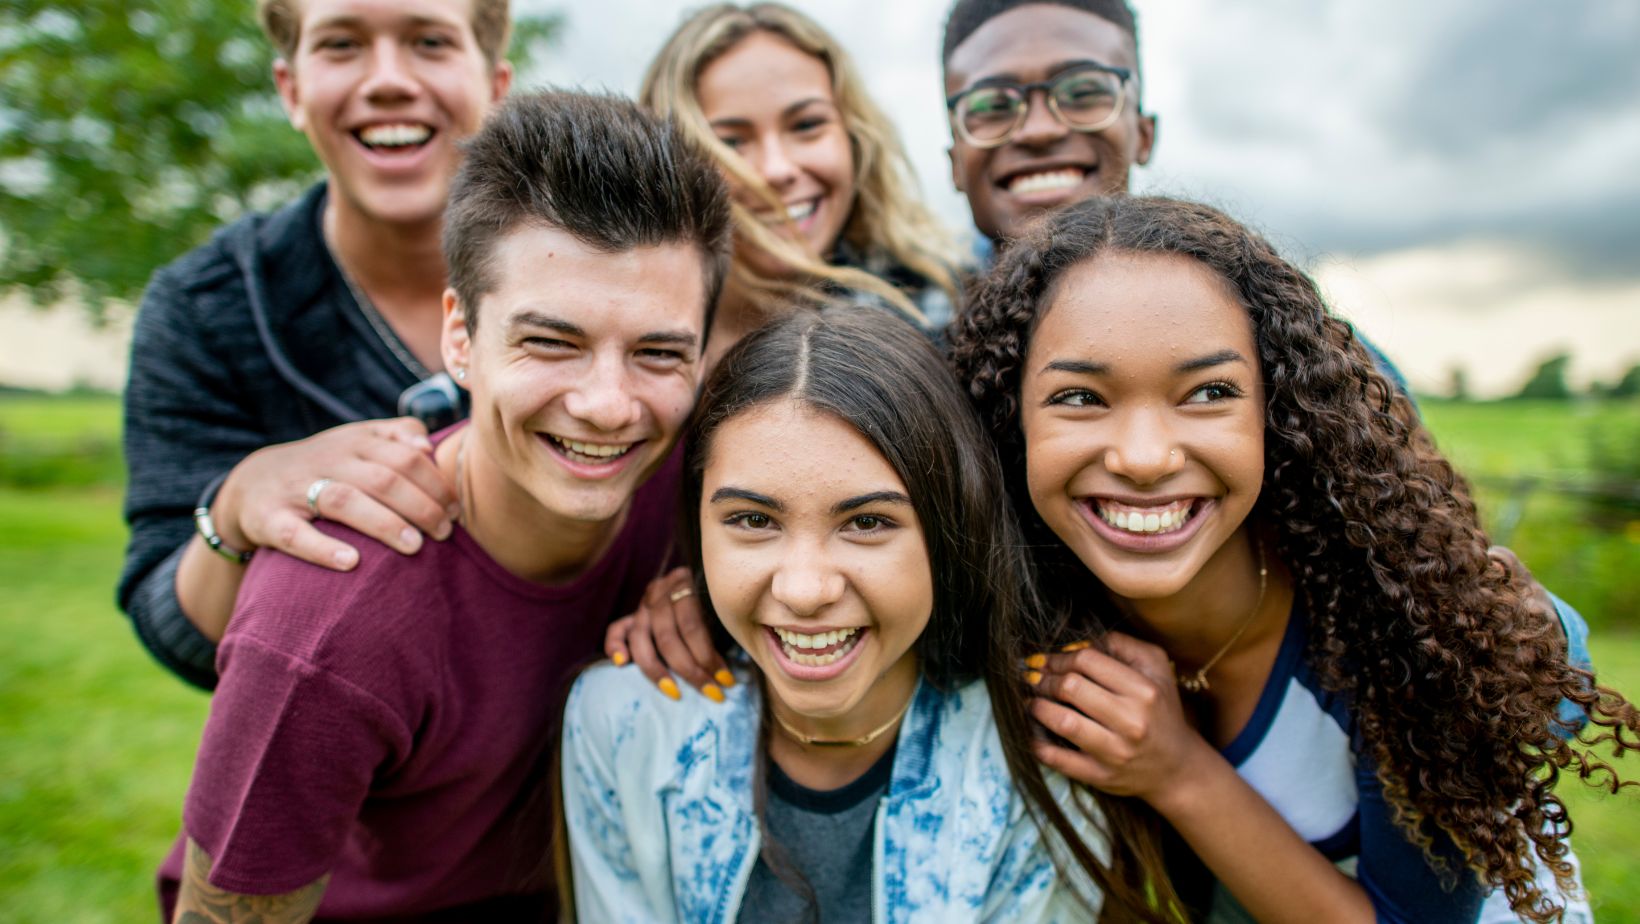 as teens move through adolescence, surrounding adults usually have higher expectations of them.